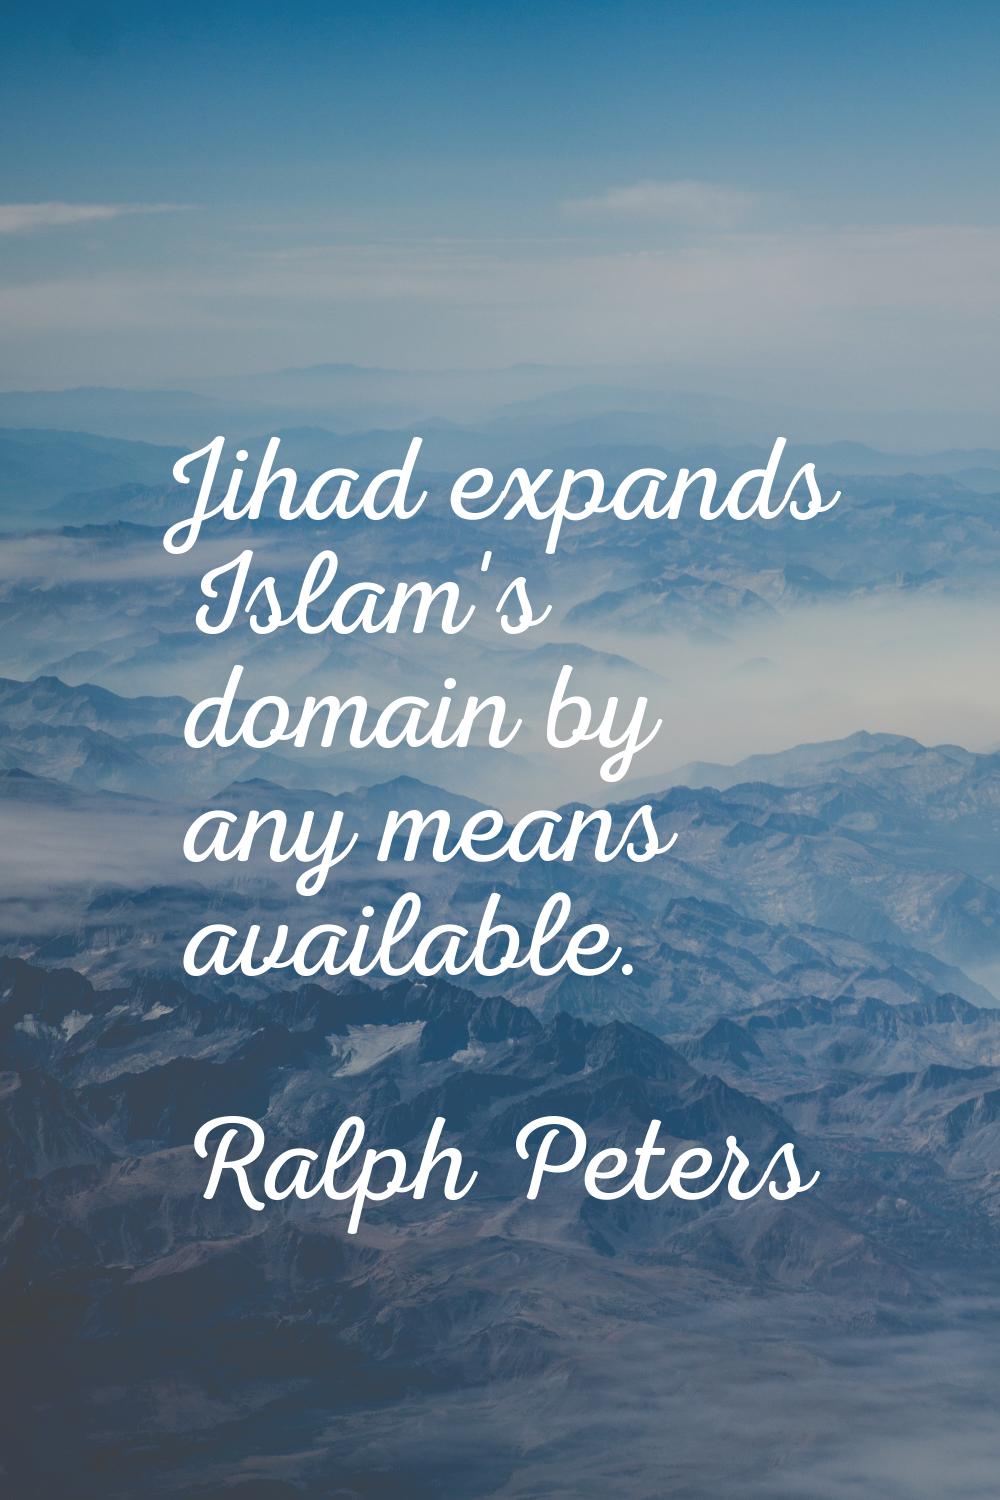 Jihad expands Islam's domain by any means available.